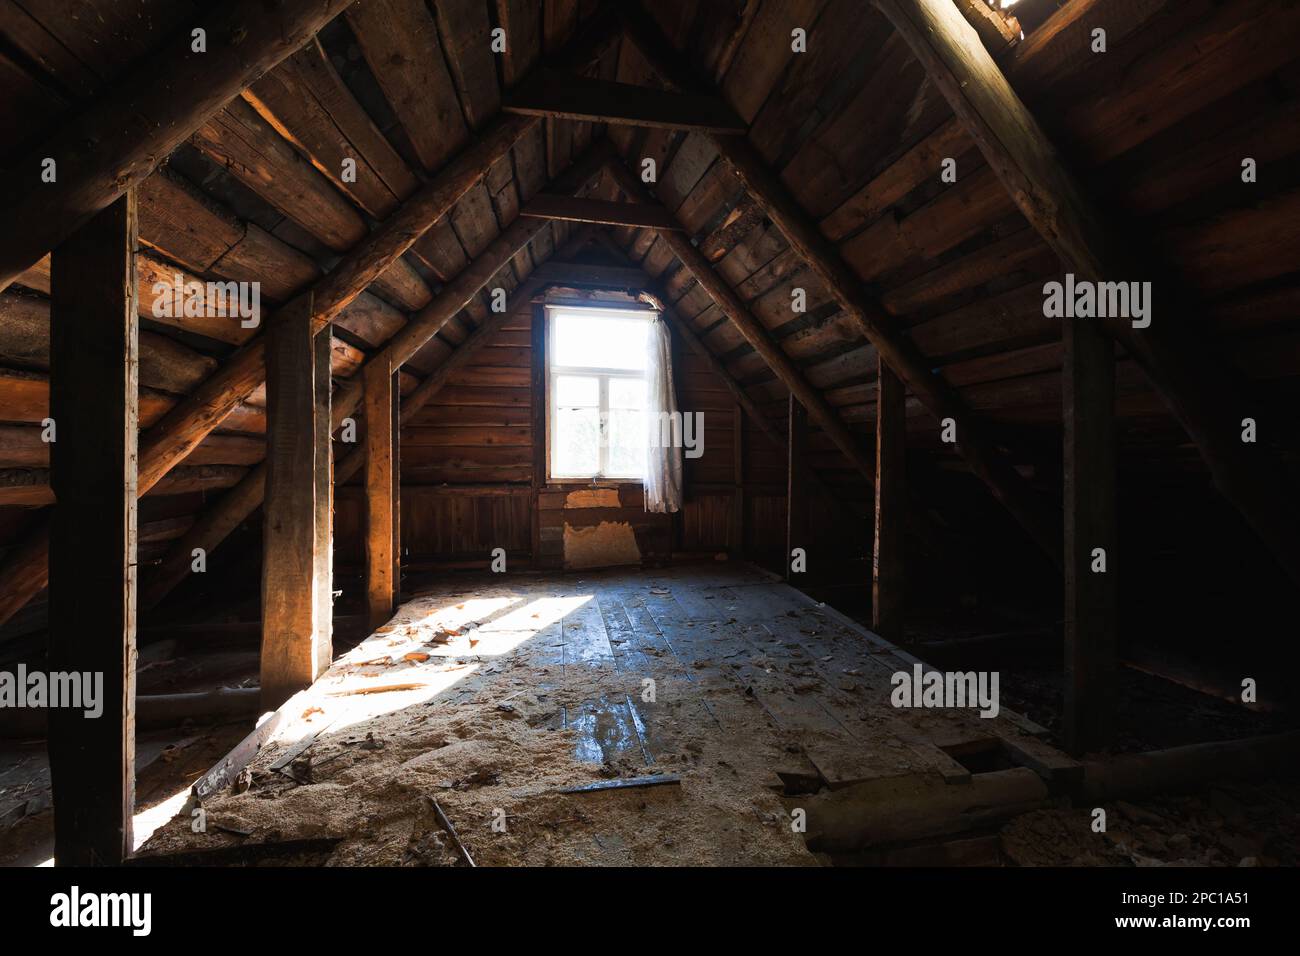 Abstract grunge wooden interior, perspective view of an abandoned attic room with glowing window Stock Photo